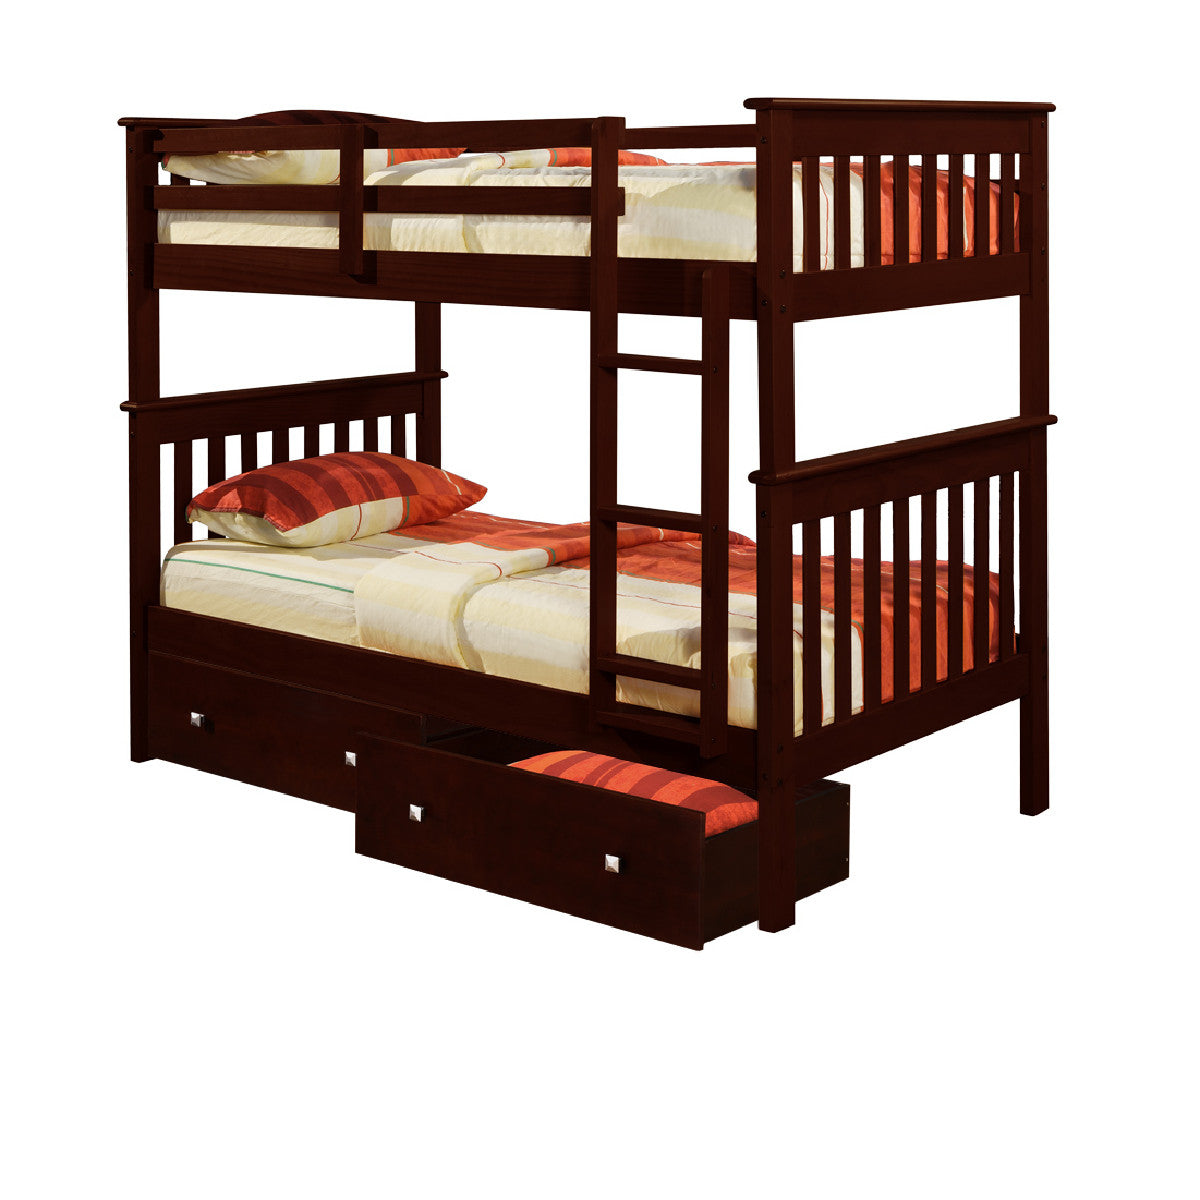 TWIN/TWIN MISSION BUNK BED WITH UNDER BED DRAWERS CAPPUCCINO FINISH